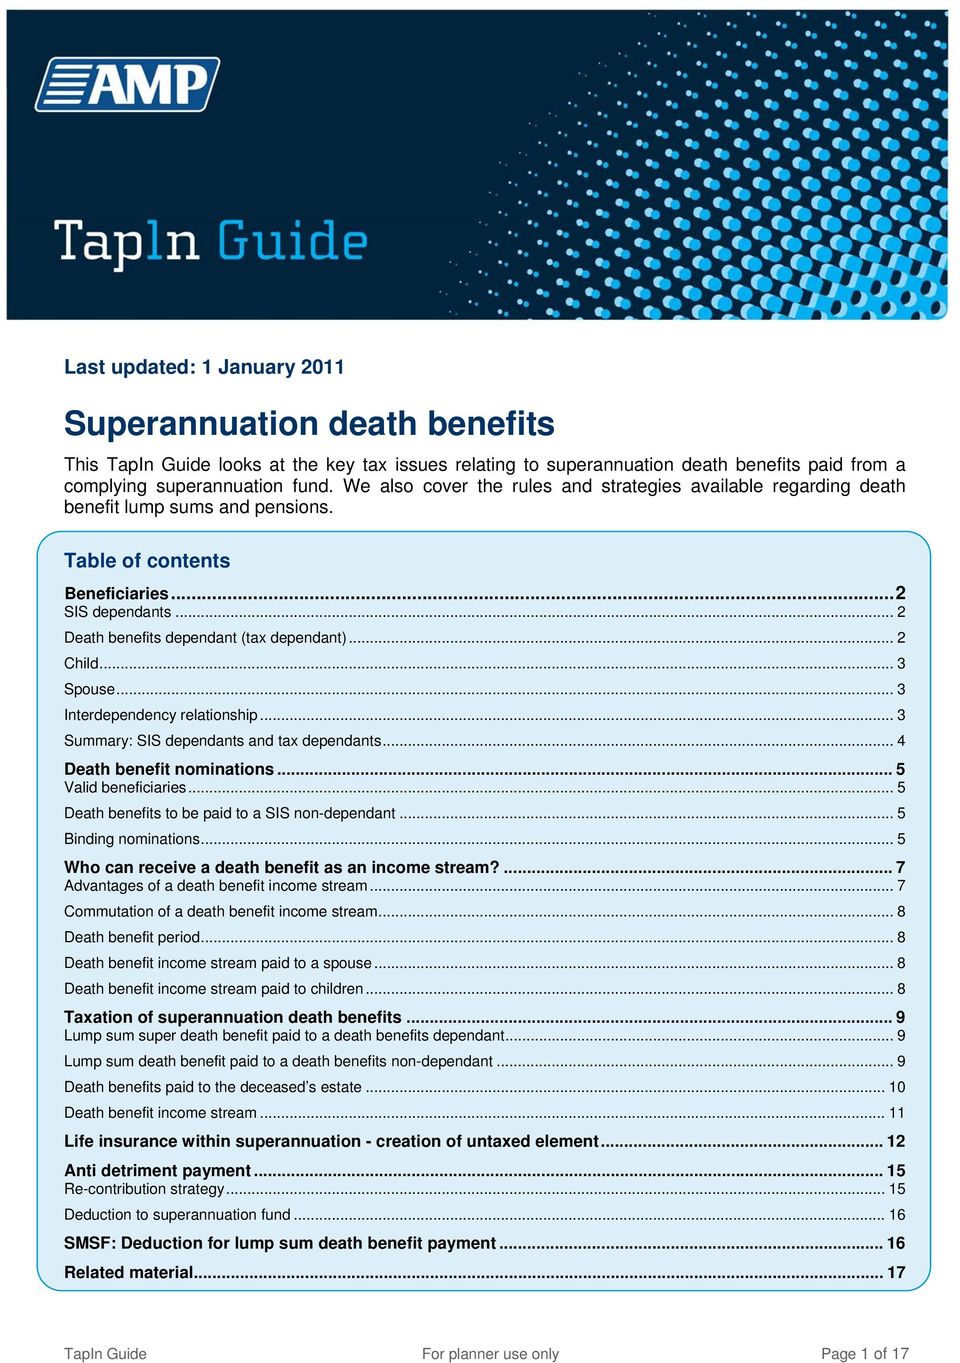 .. 2 Death benefits dependant (tax dependant)... 2 Child... 3 Spouse... 3 Interdependency relationship... 3 Summary: SIS dependants and tax dependants... 4 Death benefit nominations.